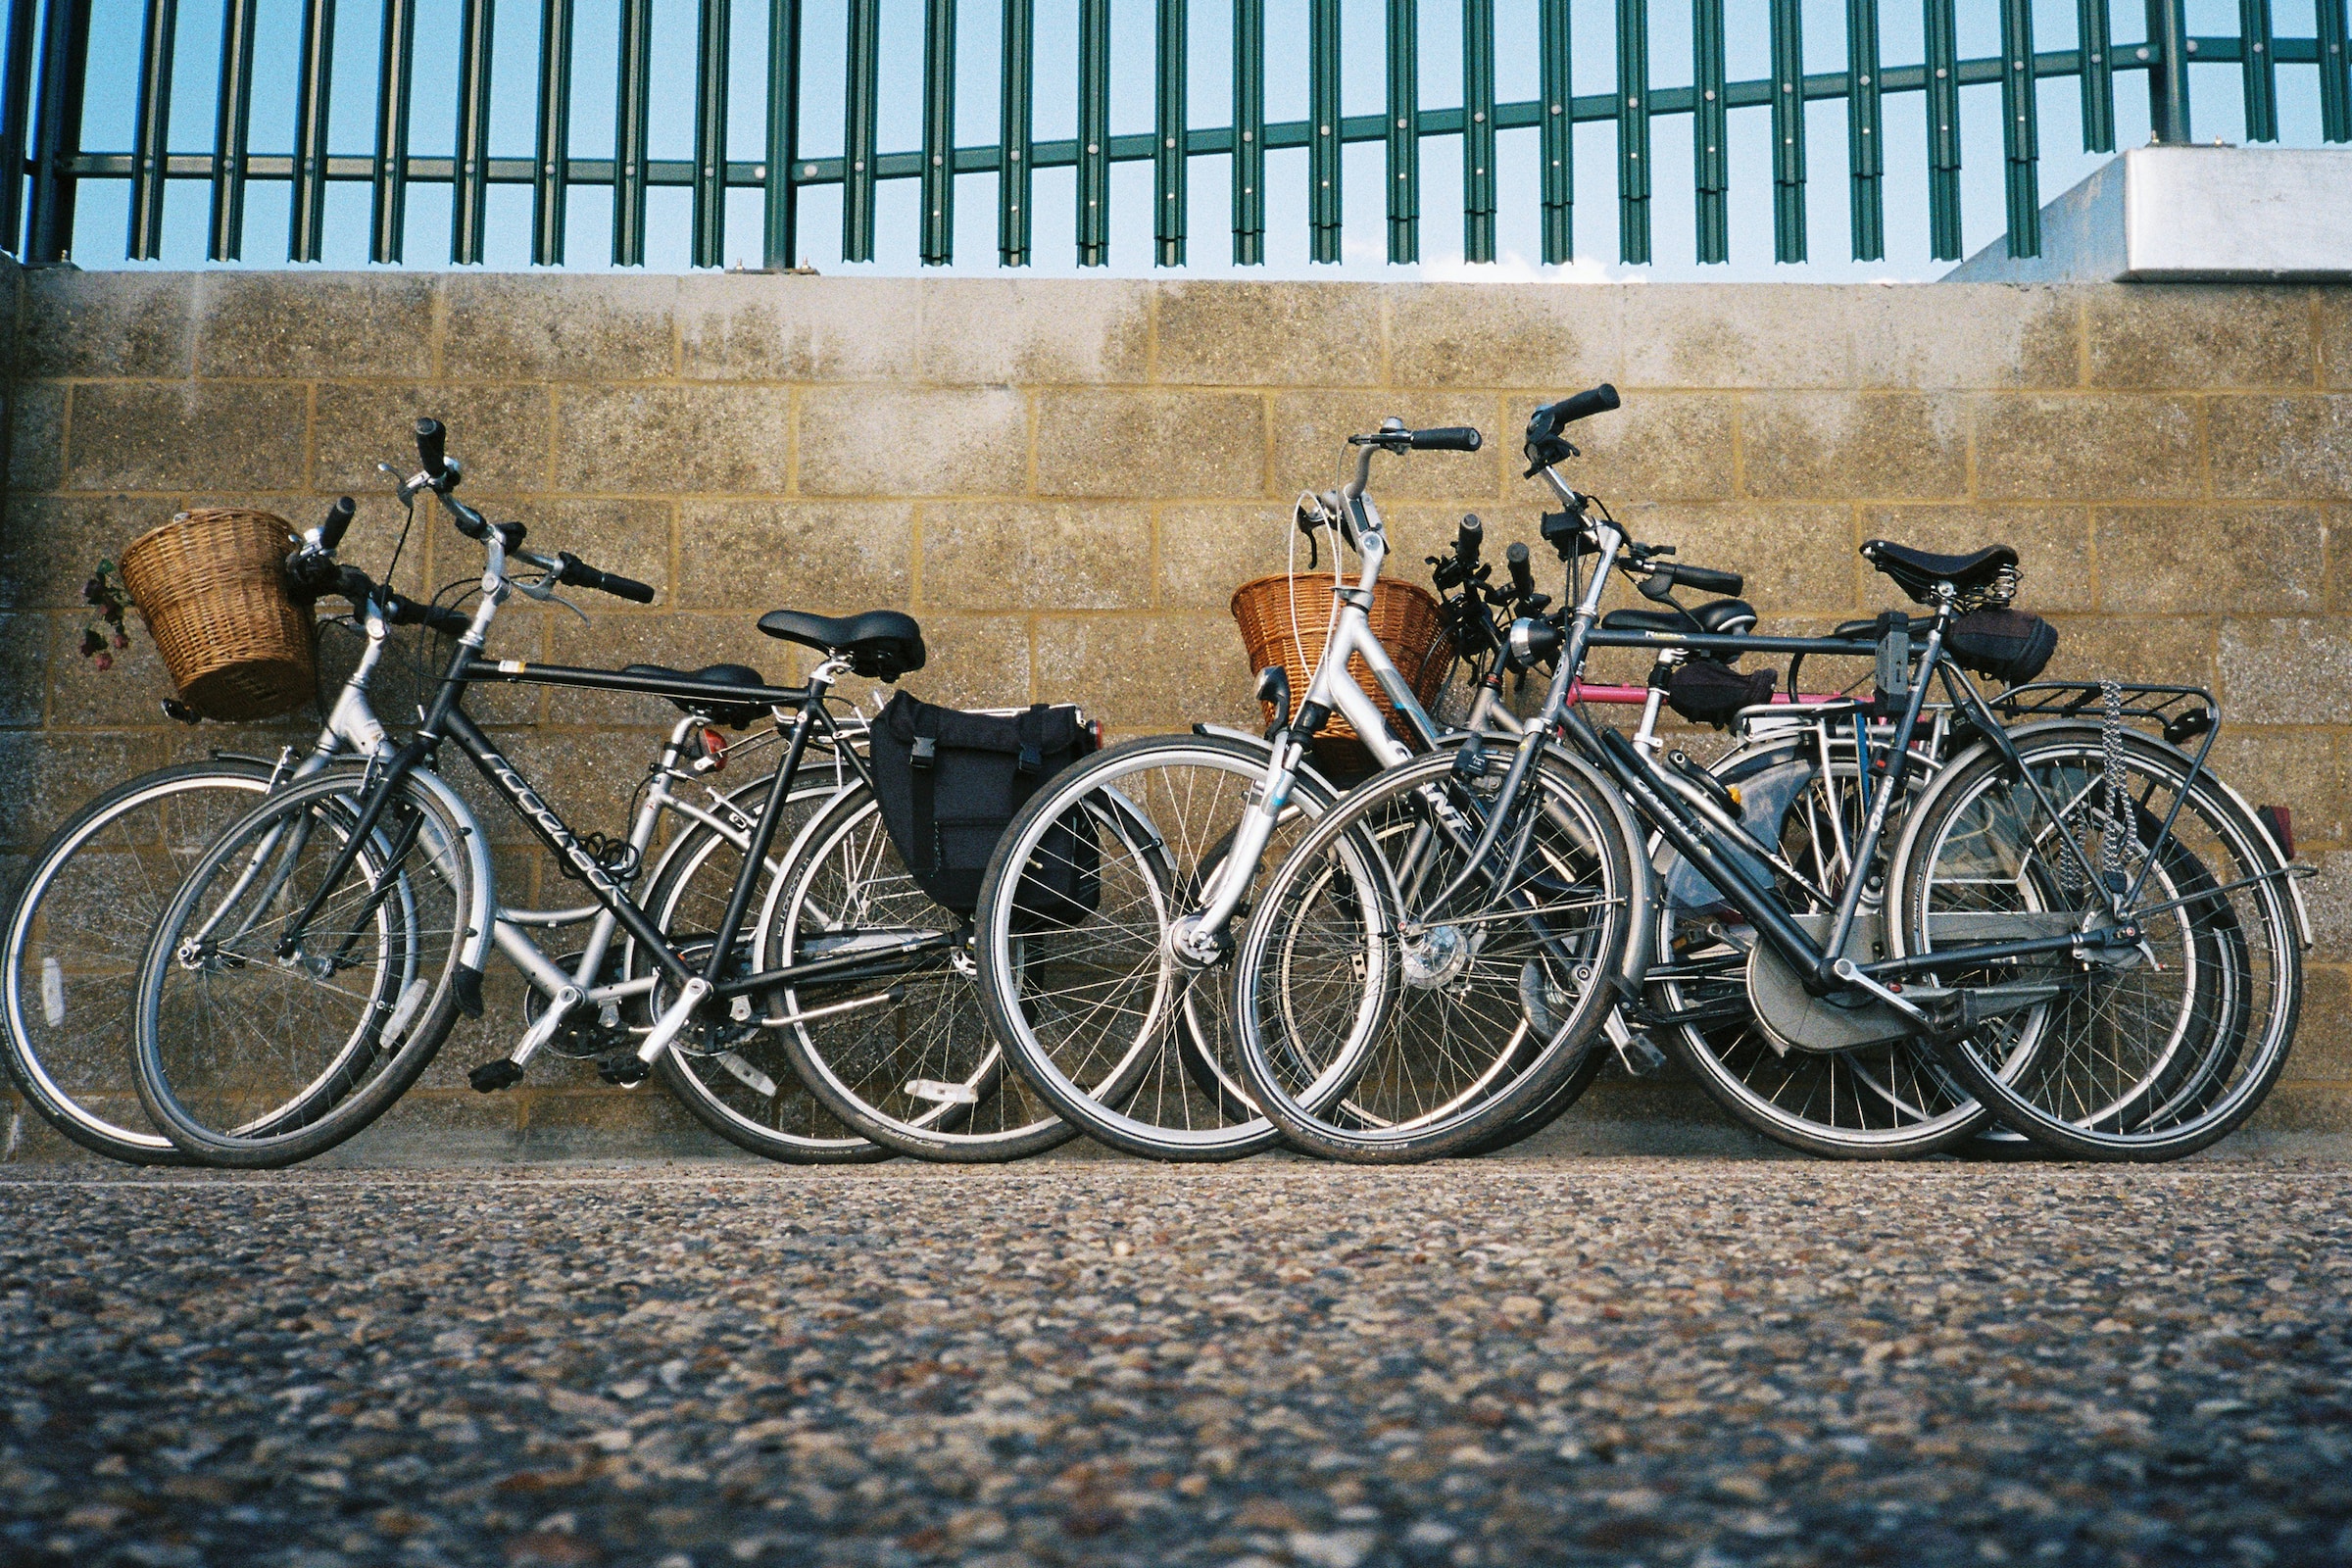 Volunteers at The Bike Shed Keep Old Bikes Out of Landfill